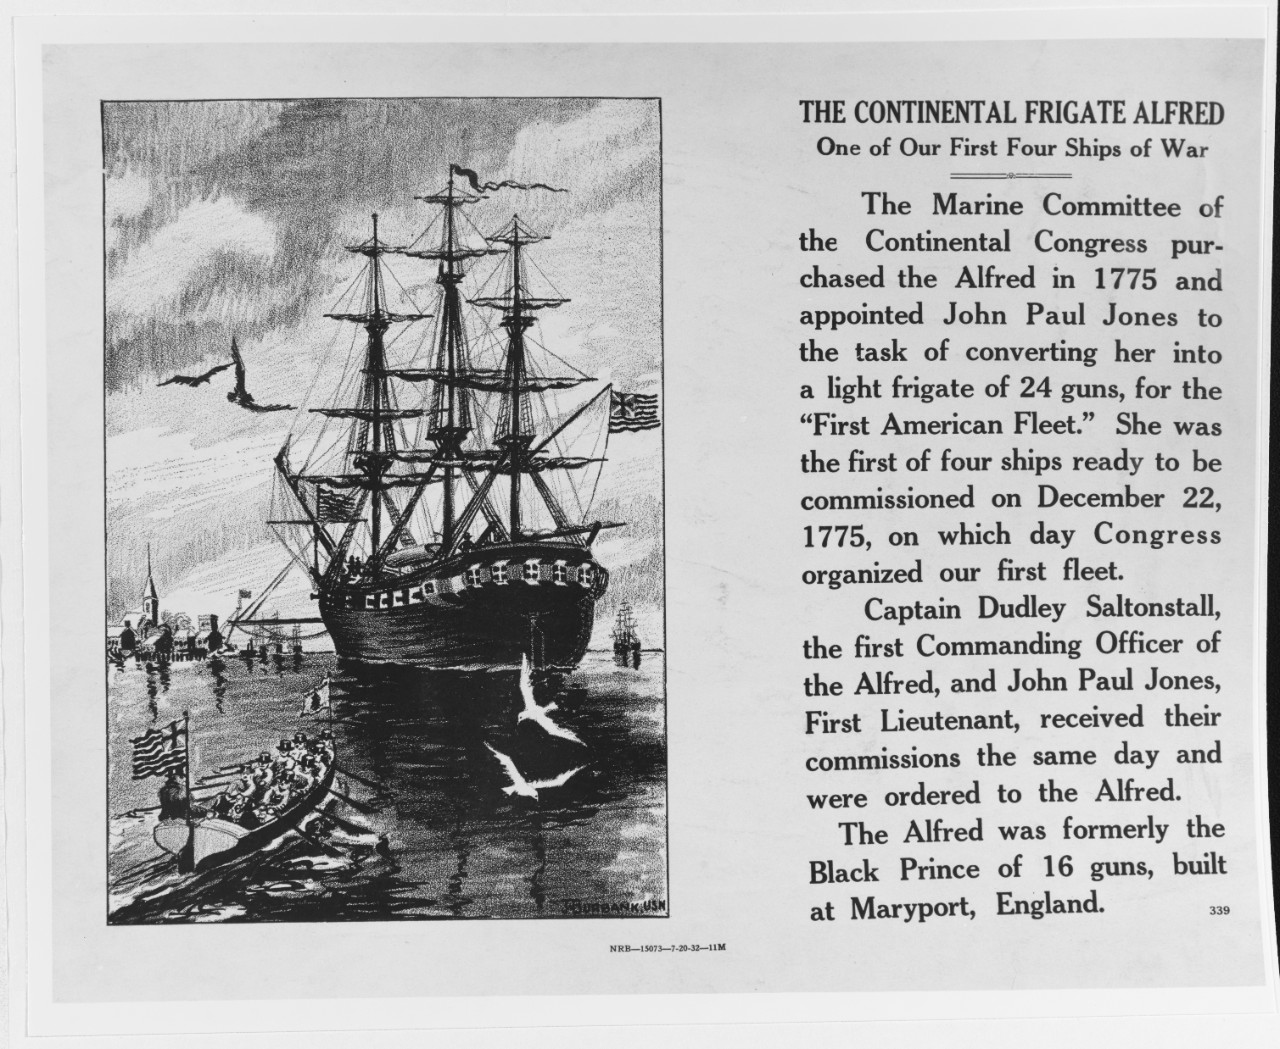 Recruiting poster:  The Continental Frigate ALFRED, one of our first four ships of war